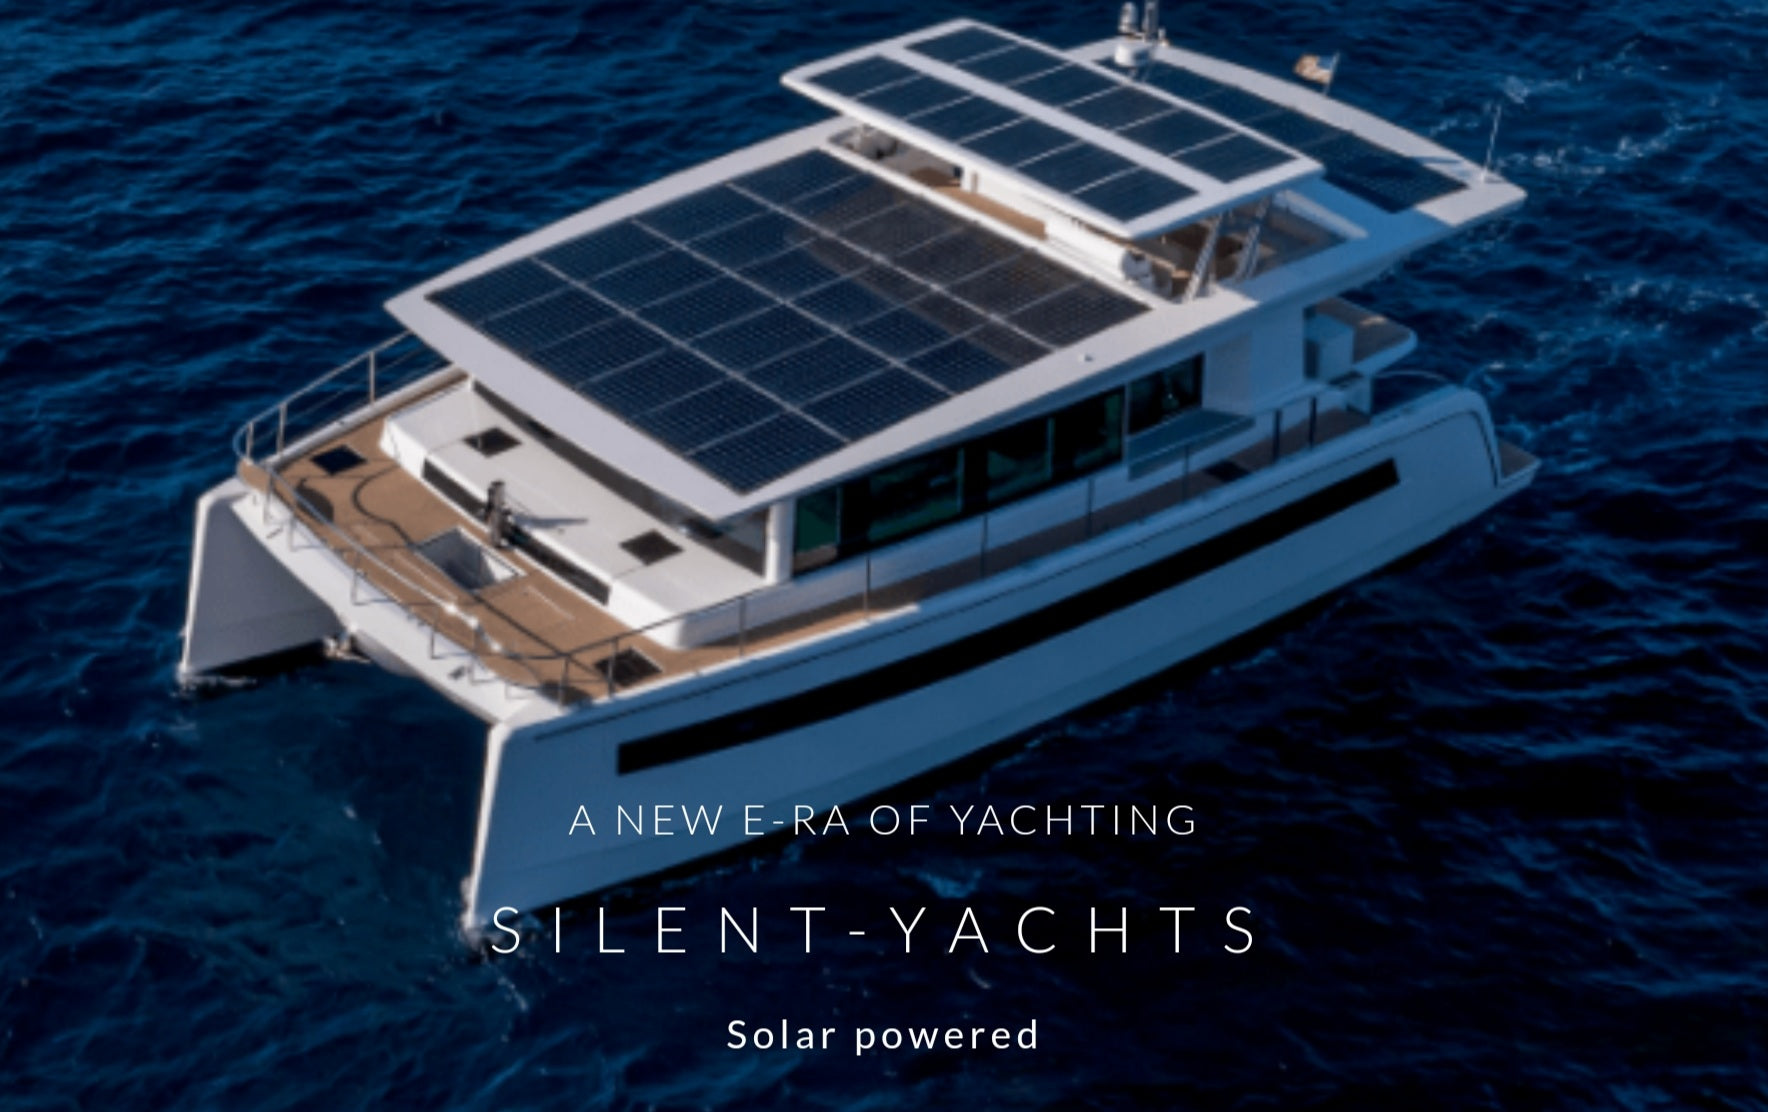 Silent Yachts will integrate SpaceX Starlink to solar-powered vessels